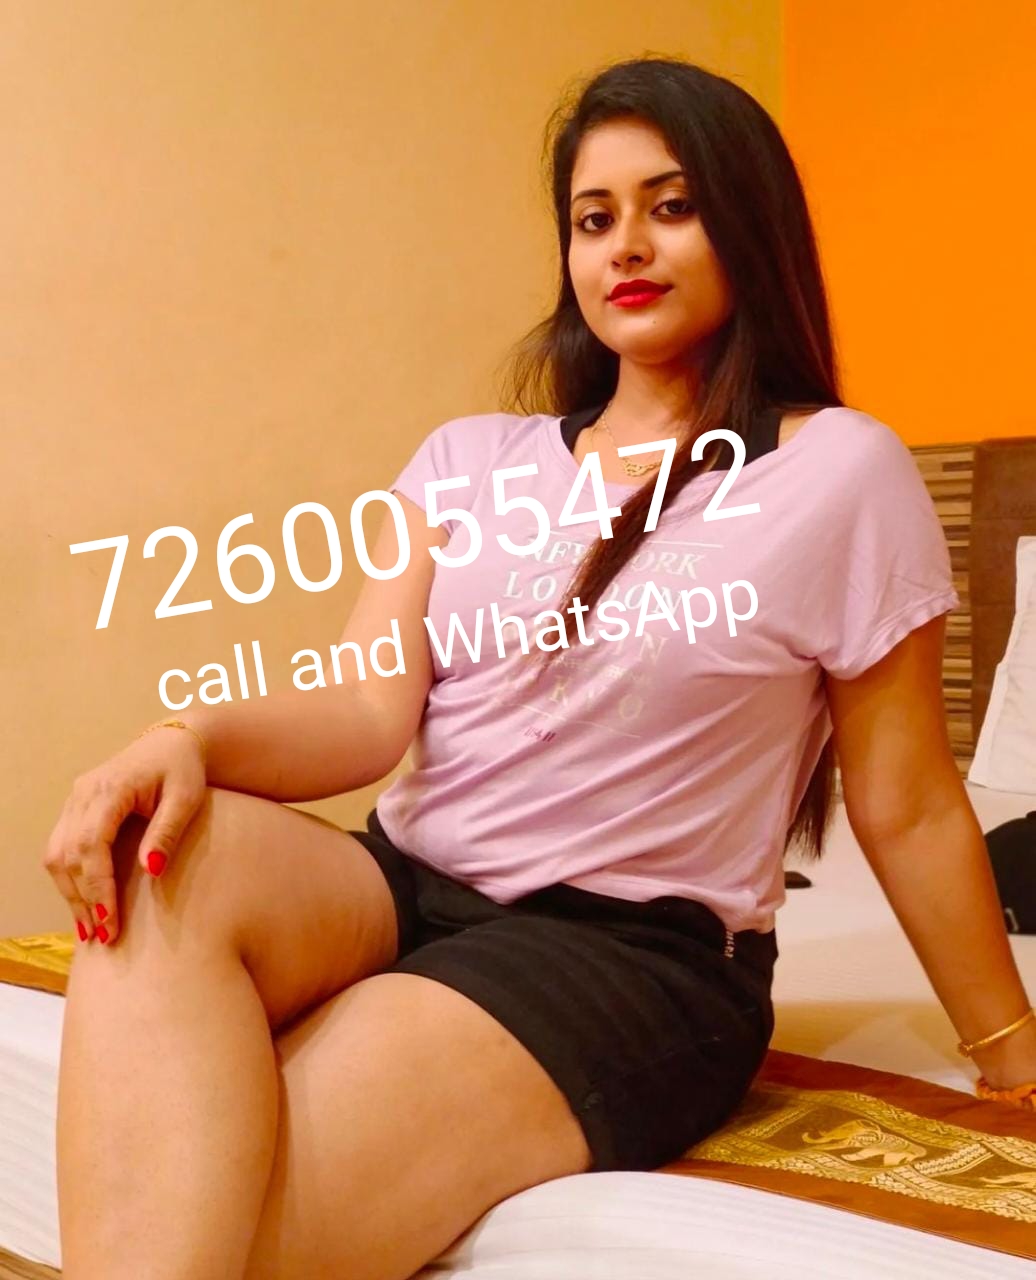 Low price %⭐⭐⭐ genuine sexy VIP call girls are provided sdh